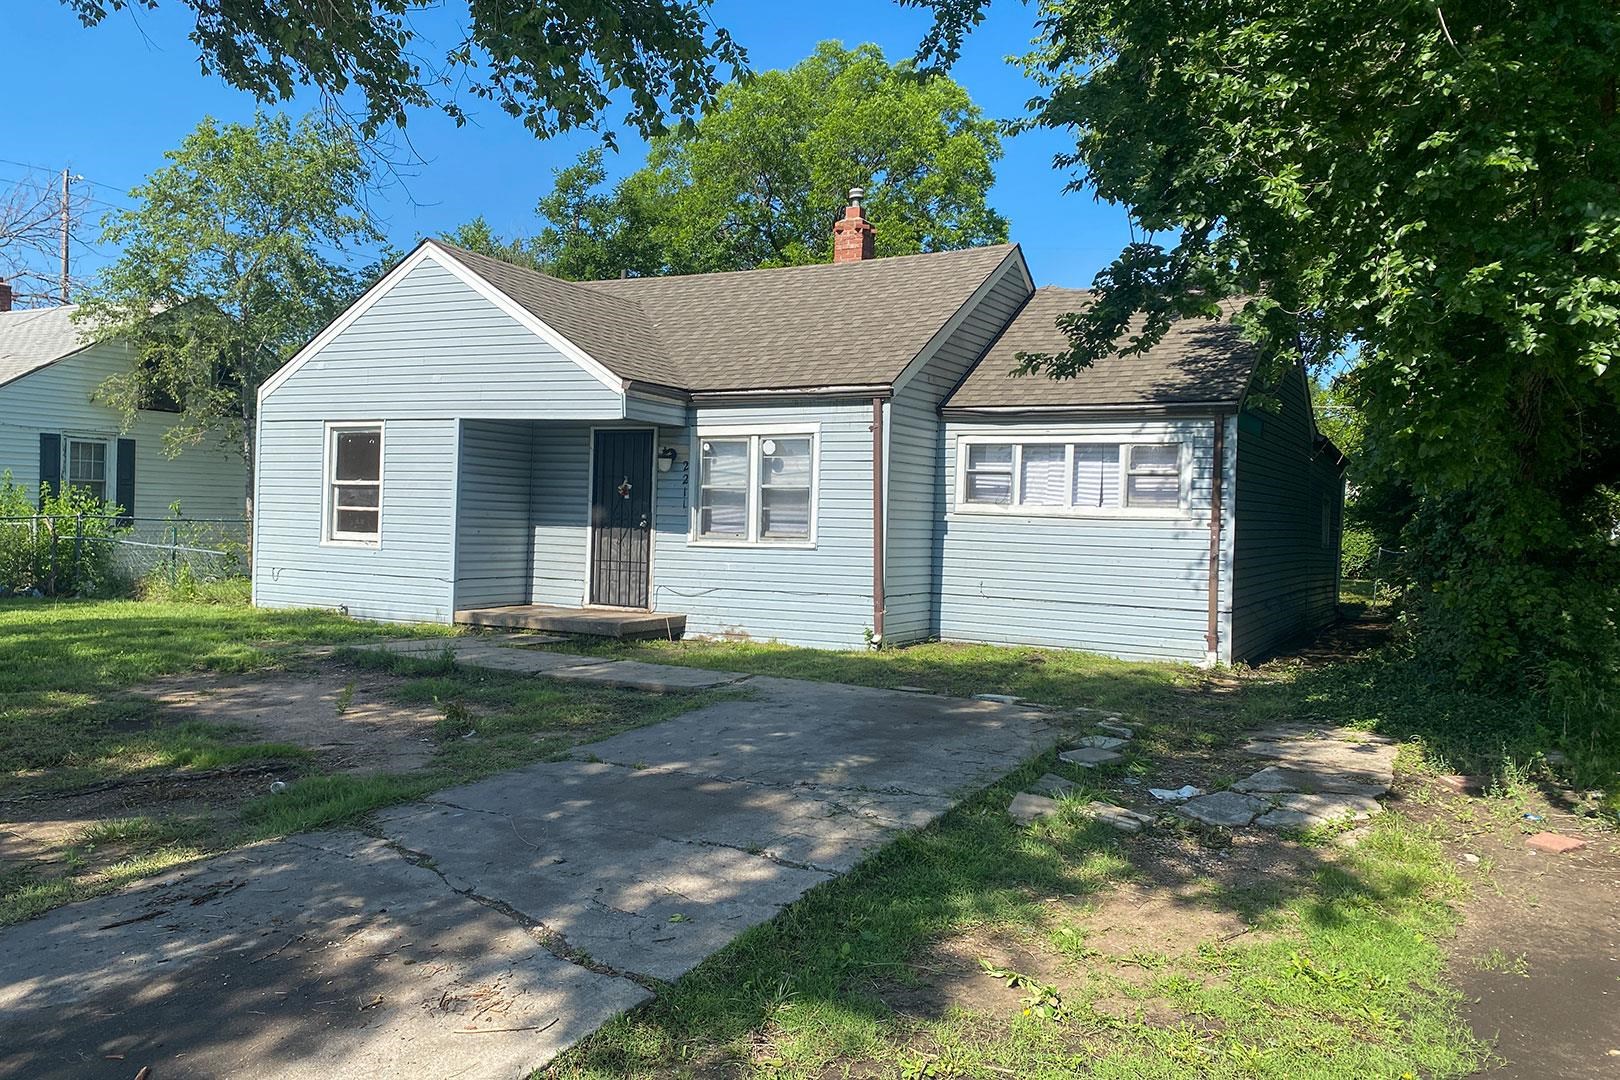 3+ bedroom, 1-bathroom home near Wichita State University! The exterior of this home offers a chain-